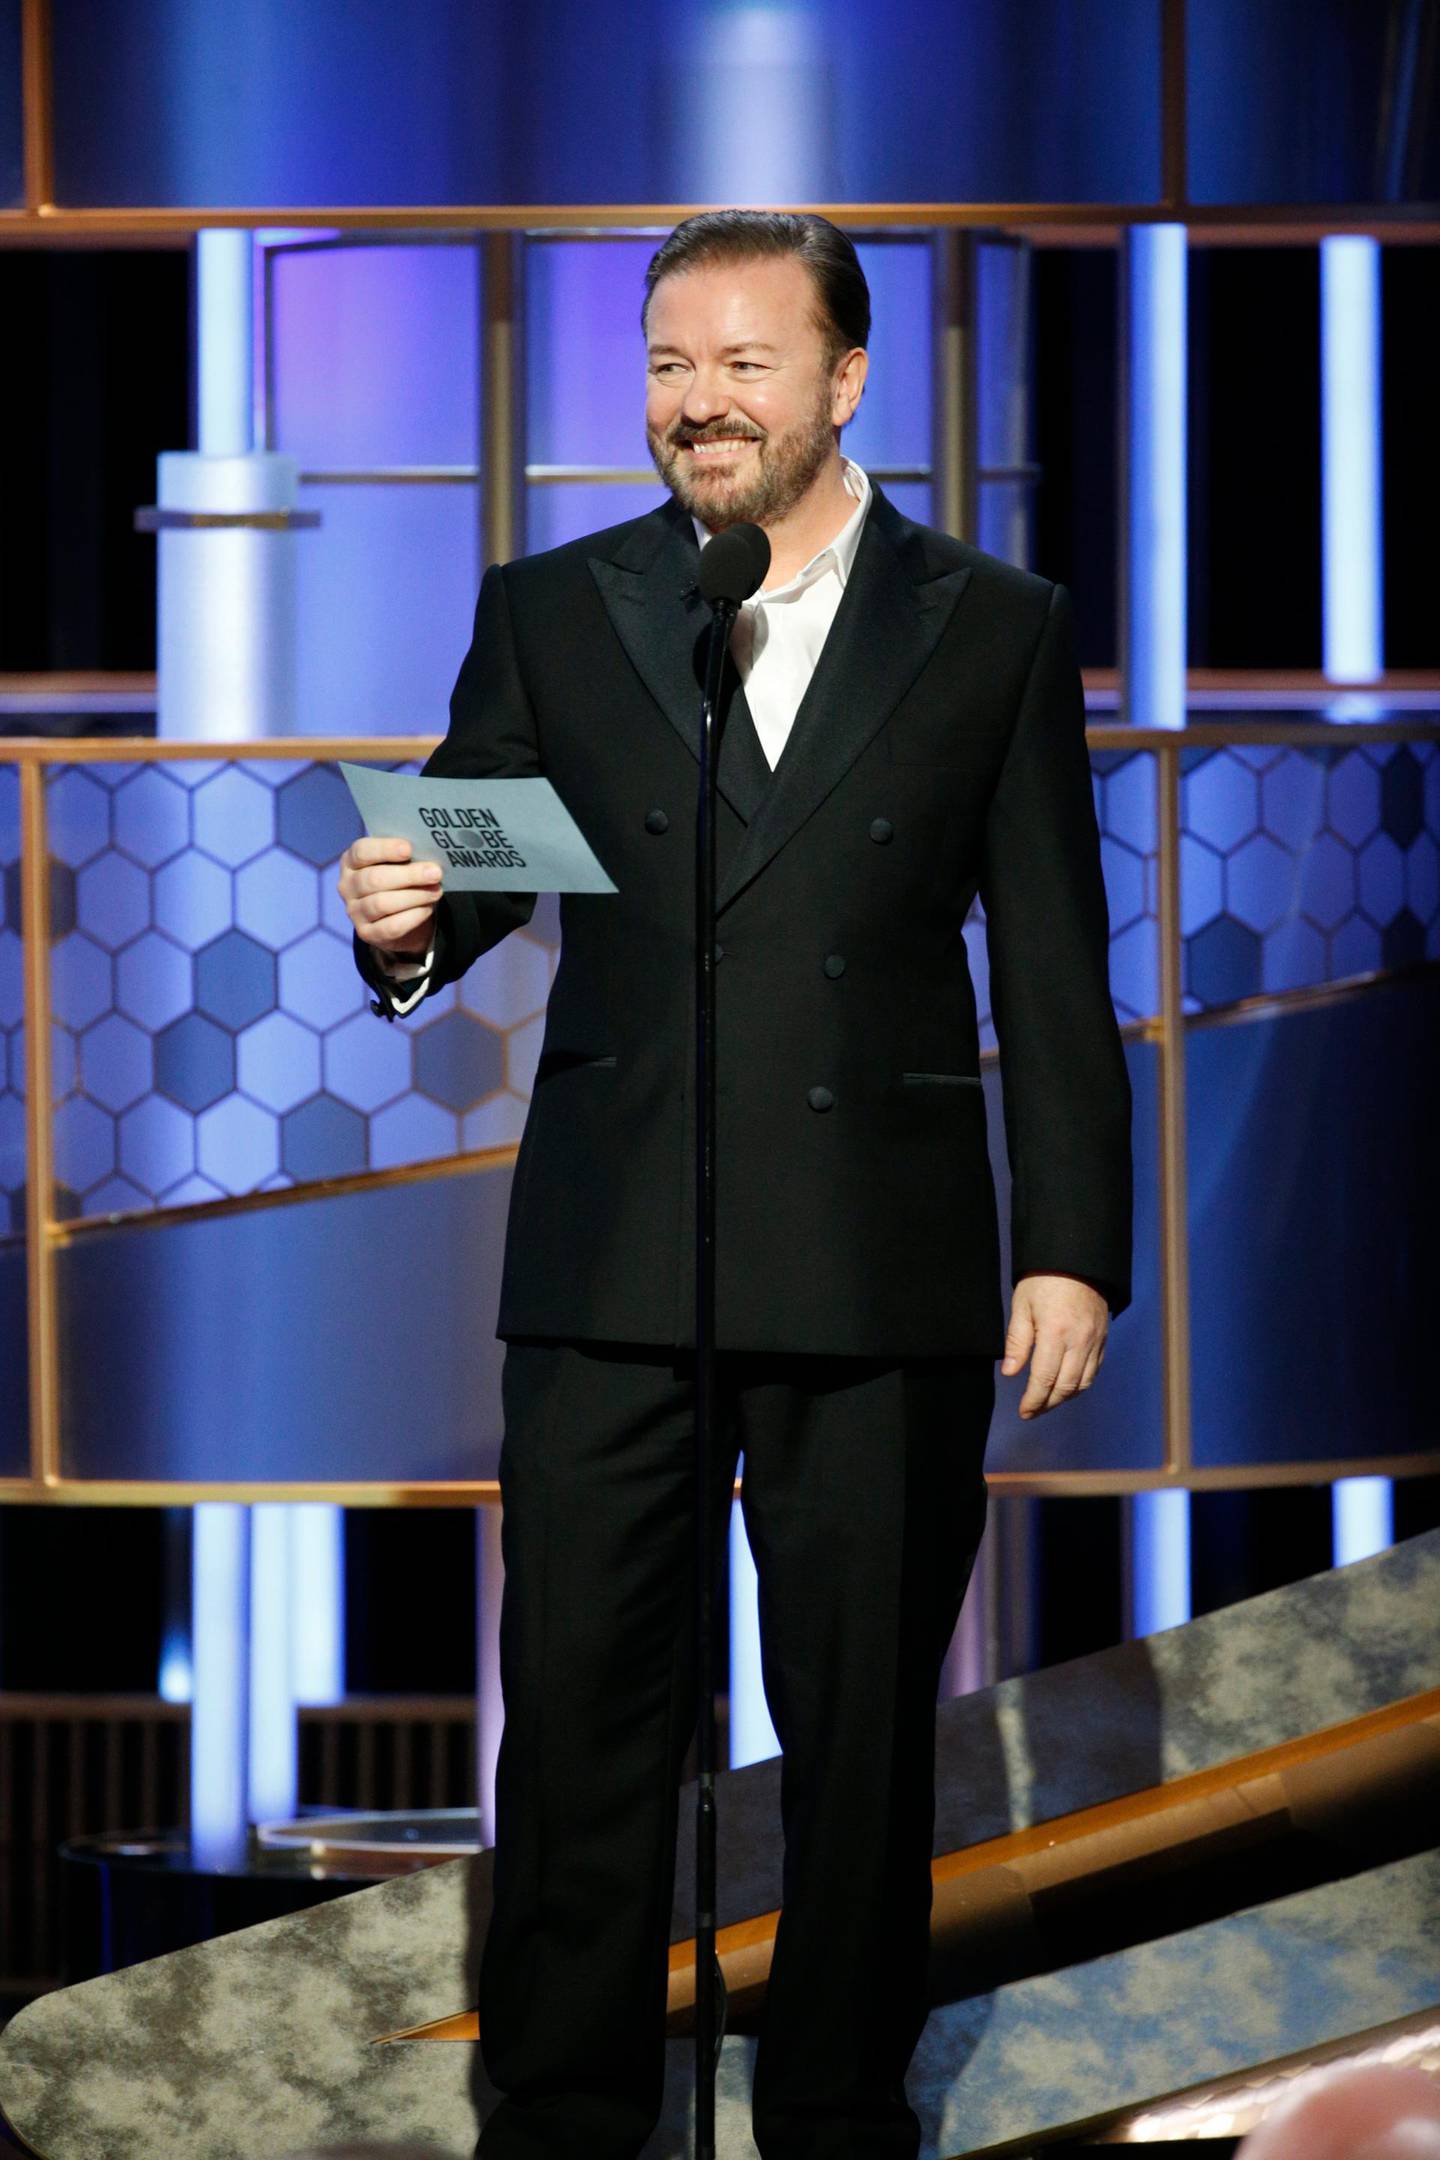 This image released by NBC shows host Ricky Gervais at the 77th Annual Golden Globe Awards at the Beverly Hilton Hotel in Beverly Hills, Calif., on Sunday, Jan. 5, 2020. (Paul Drinkwater/NBC via AP)